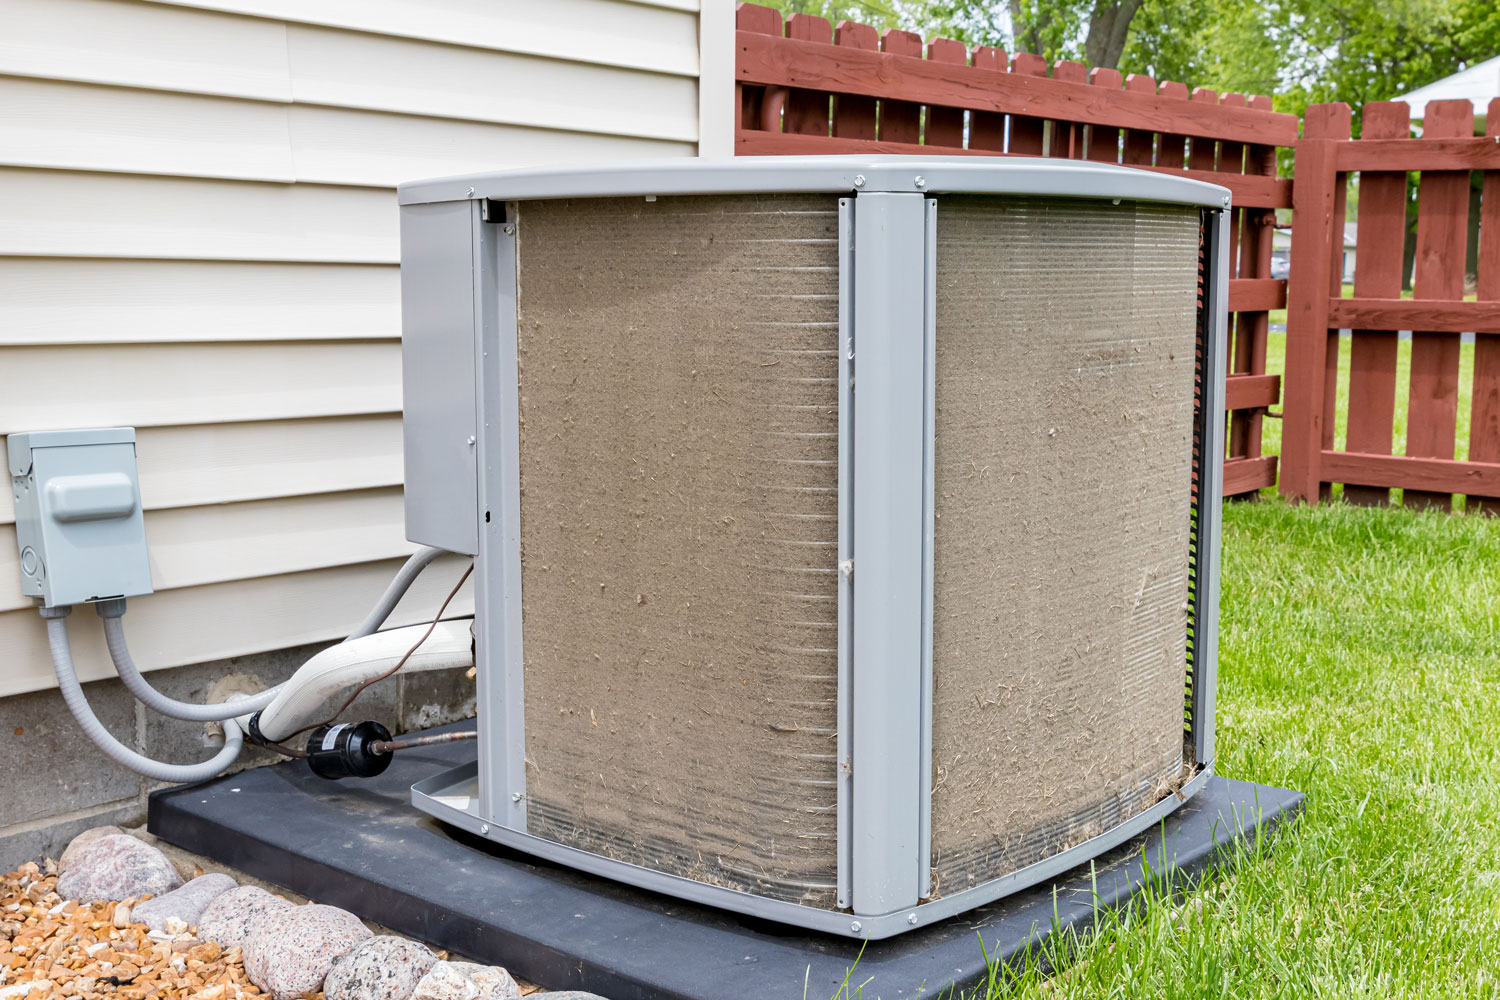 An extremely dirty air conditioning condenser